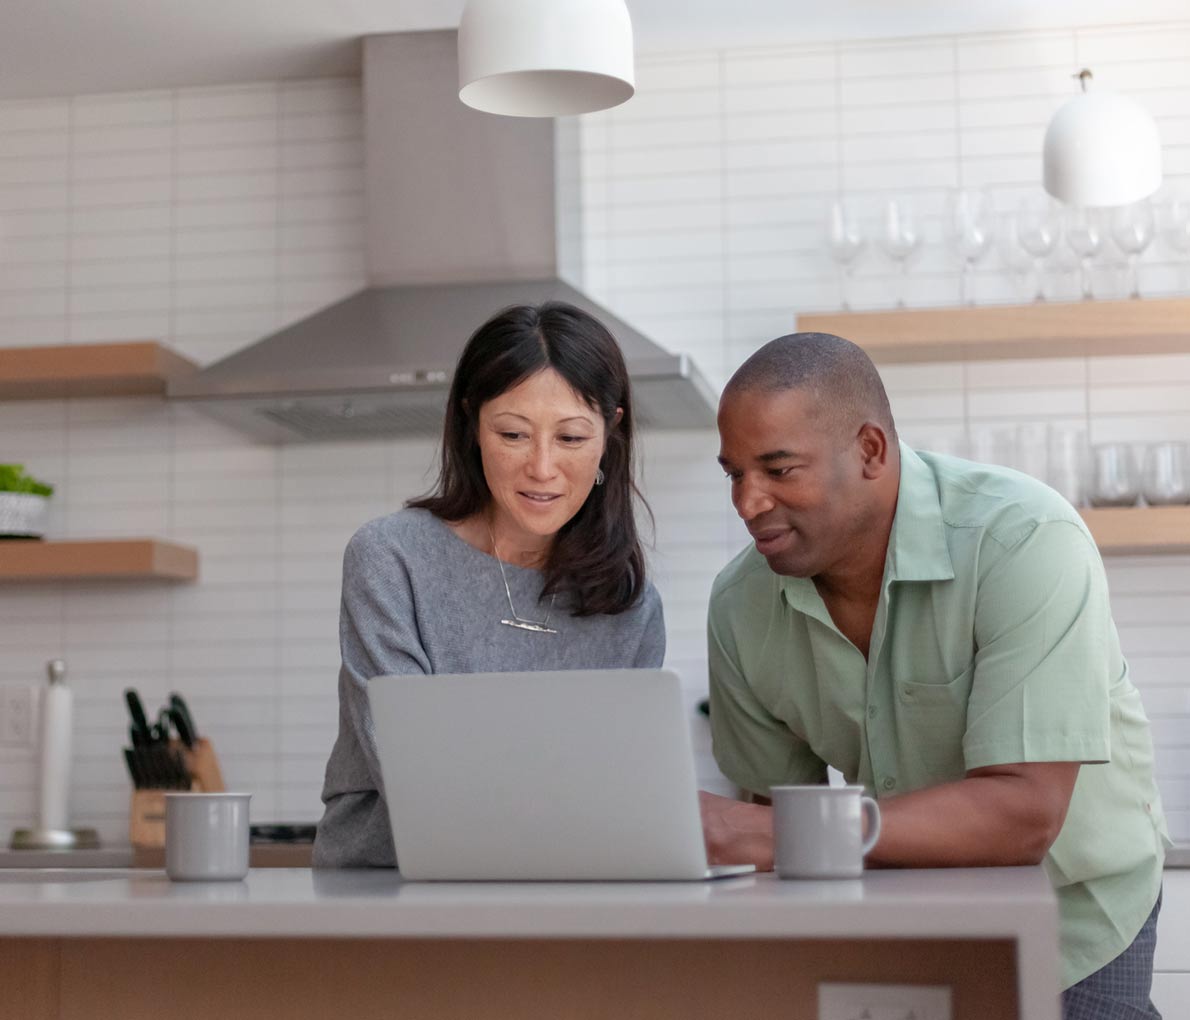 A middle-aged couple in their kitchen, reviewing RBC joint life payout annuity options for retirement income on a laptop.